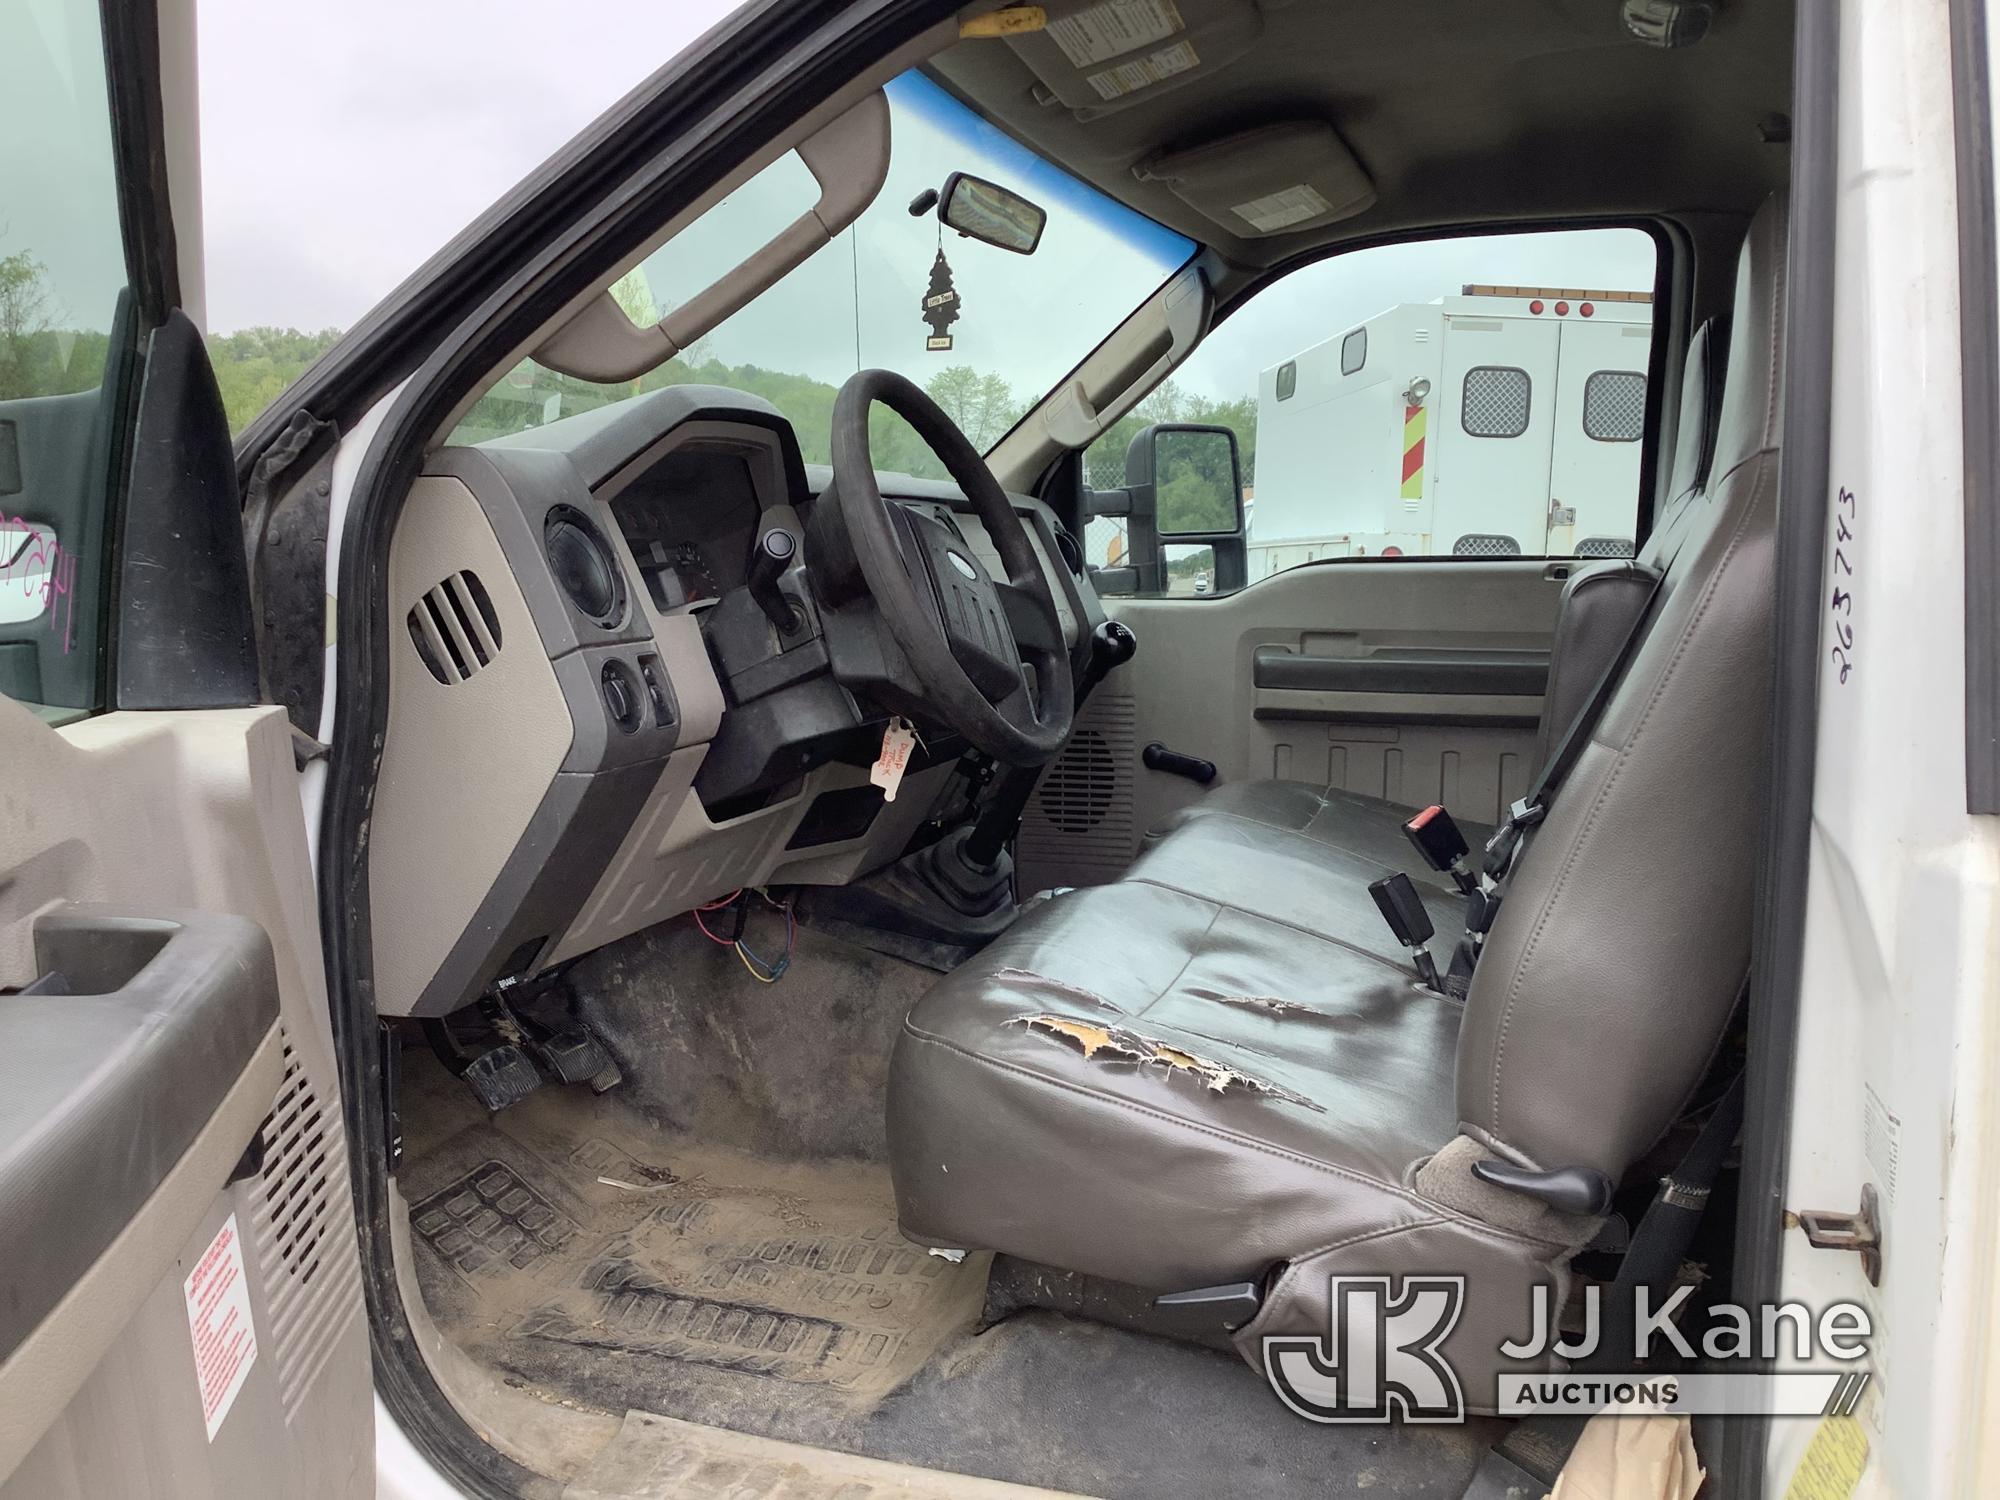 (Smock, PA) 2009 Ford F450 Dump Truck Runs, Moves & Operates, Rust & Body Damage